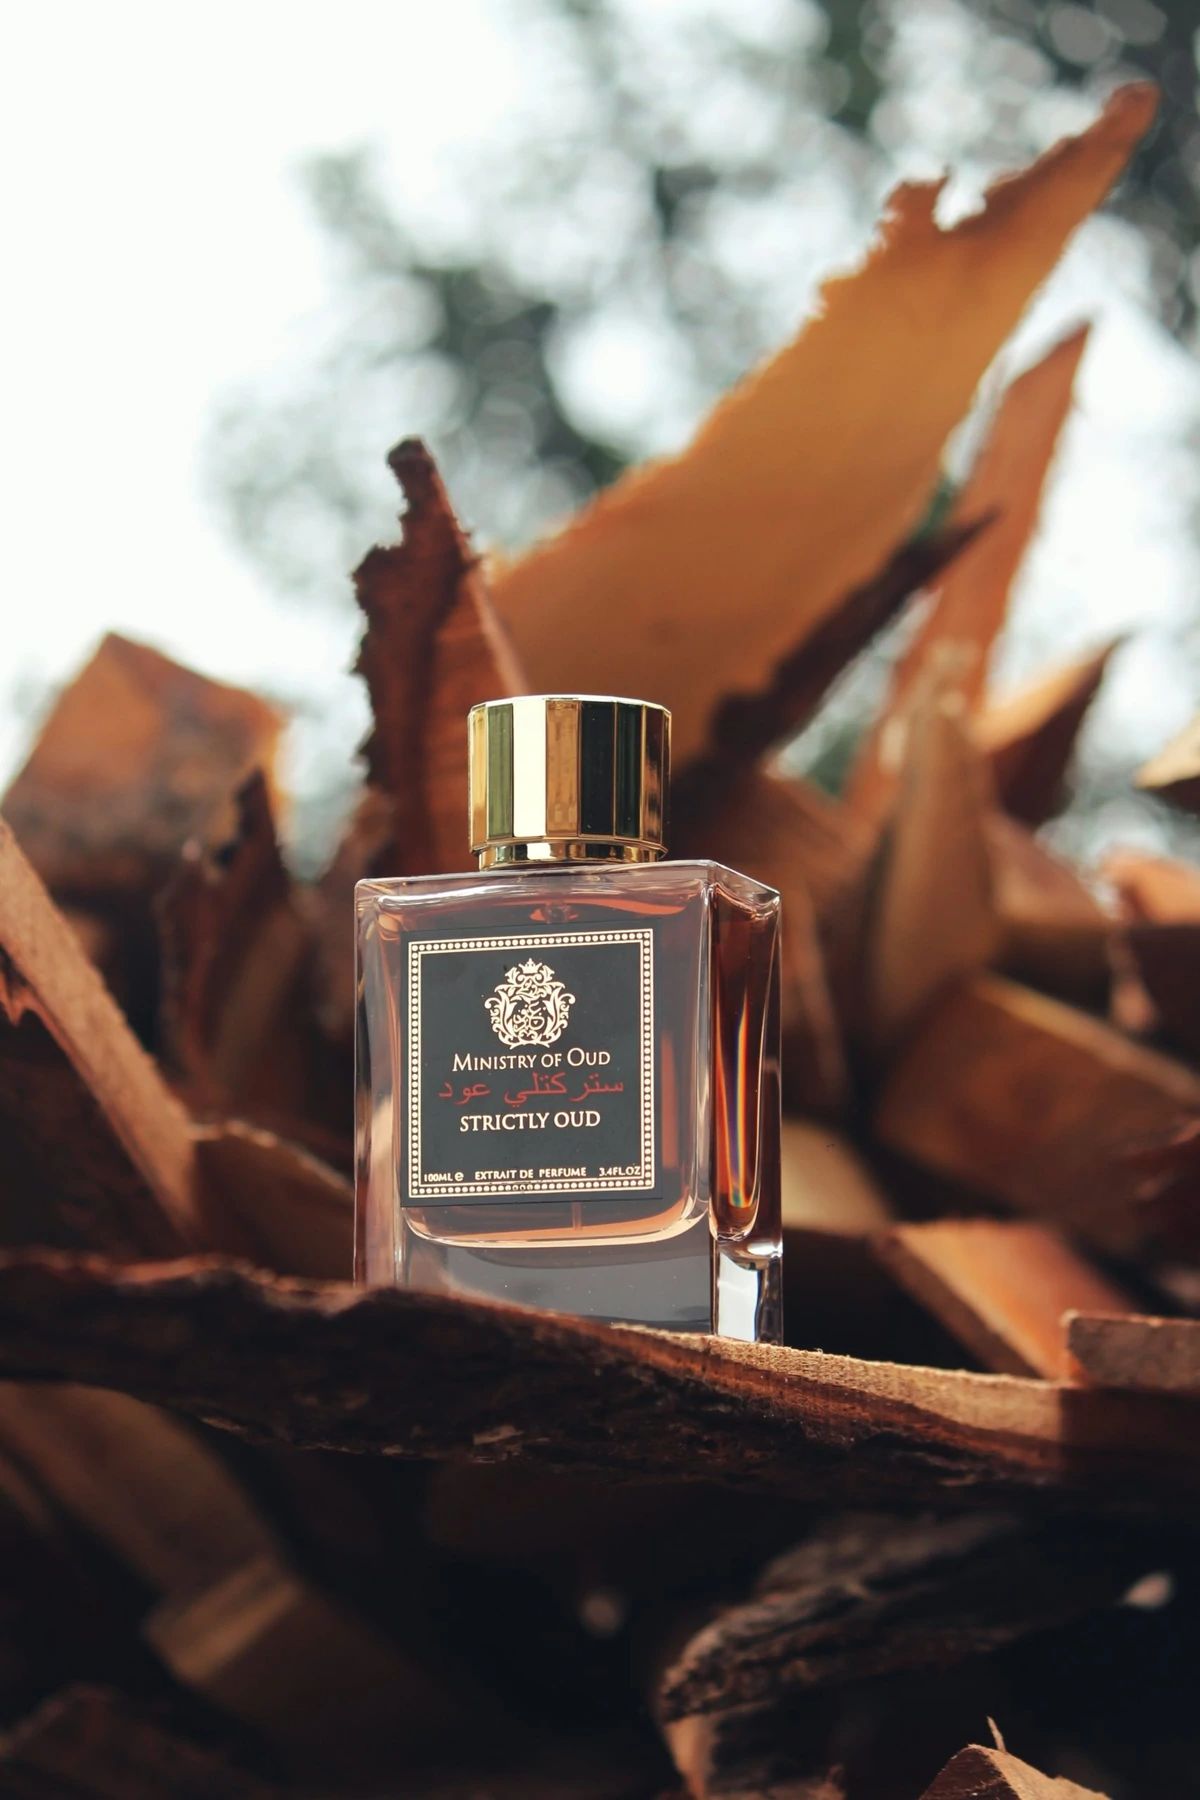 Strictly Oud Ministry of Oud perfume - a fragrance for women and men 2021